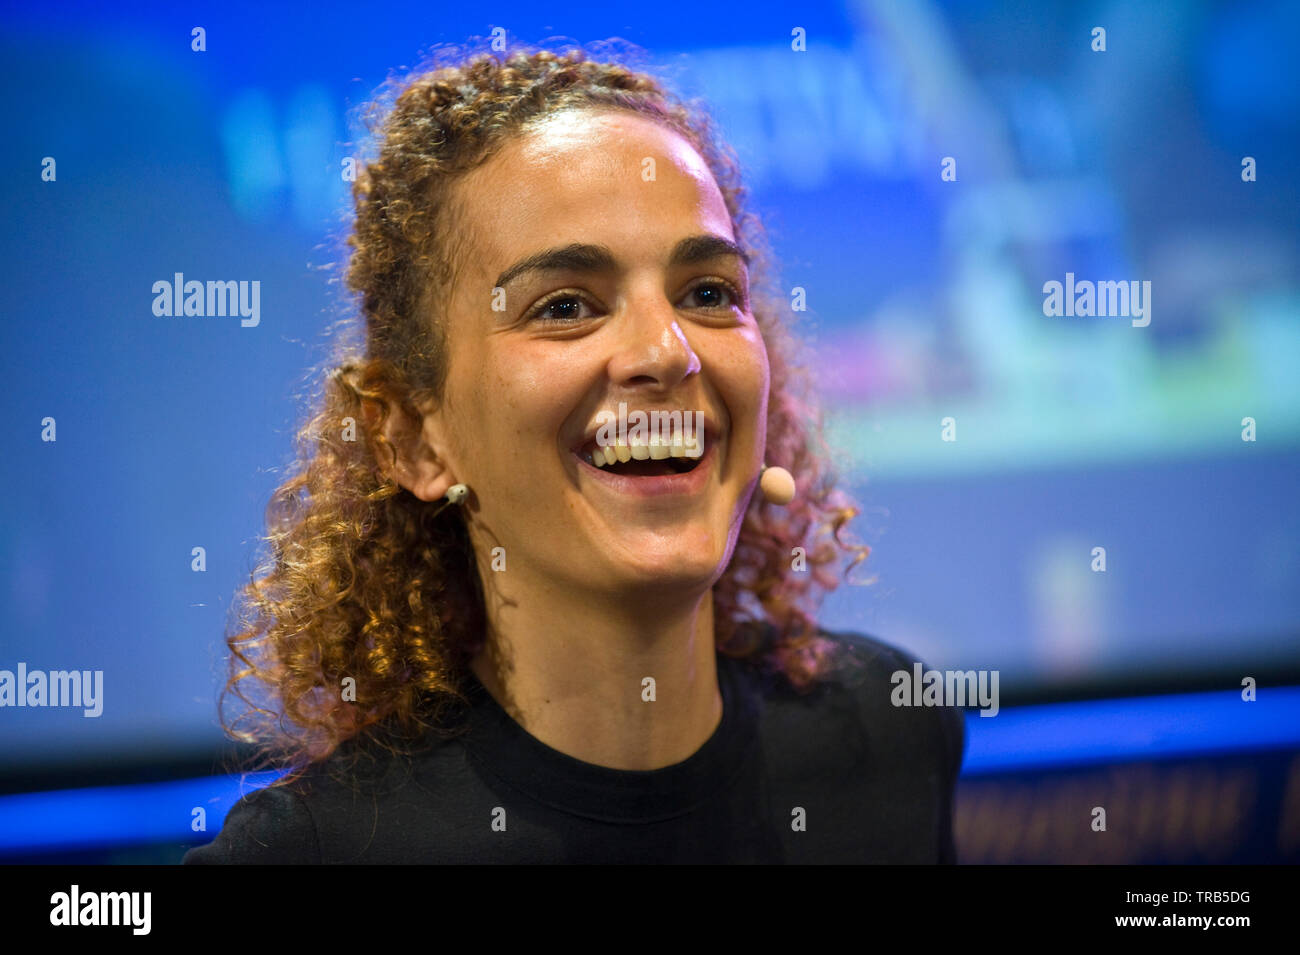 Leila Slimani Moroccan author and winner of France's most prestigious literary prize the Prix Goncourt speaking on stage at Hay Festival Hay on Wye Powys Wales UK Stock Photo